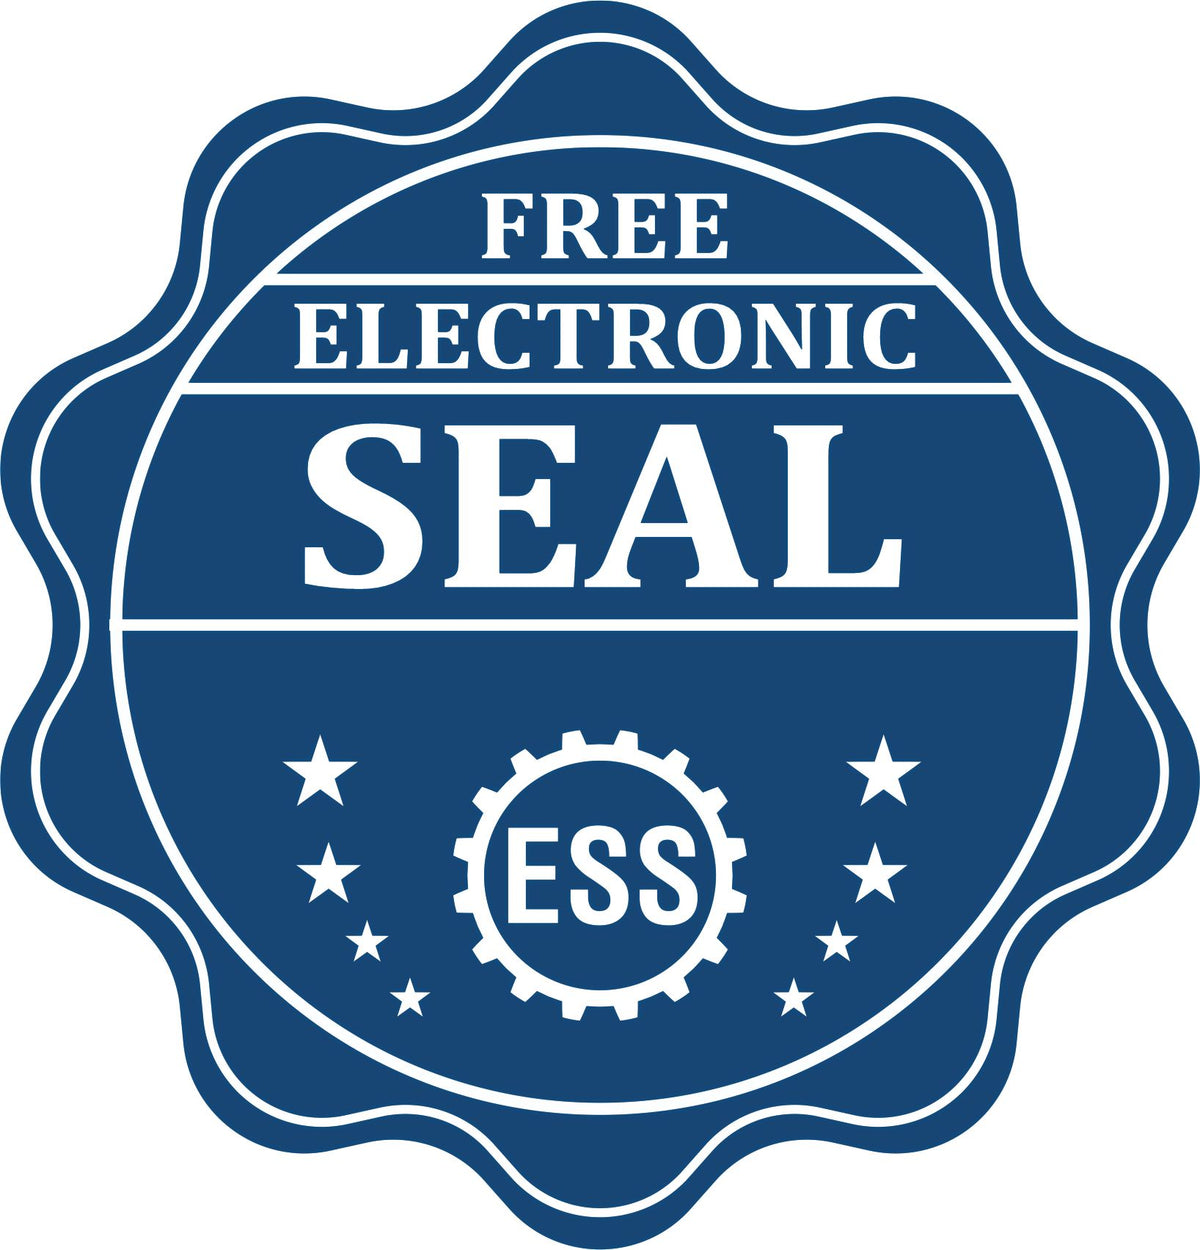 A badge showing a free electronic seal for the PSI New Jersey Notary Stamp with stars and the ESS gear on the emblem.